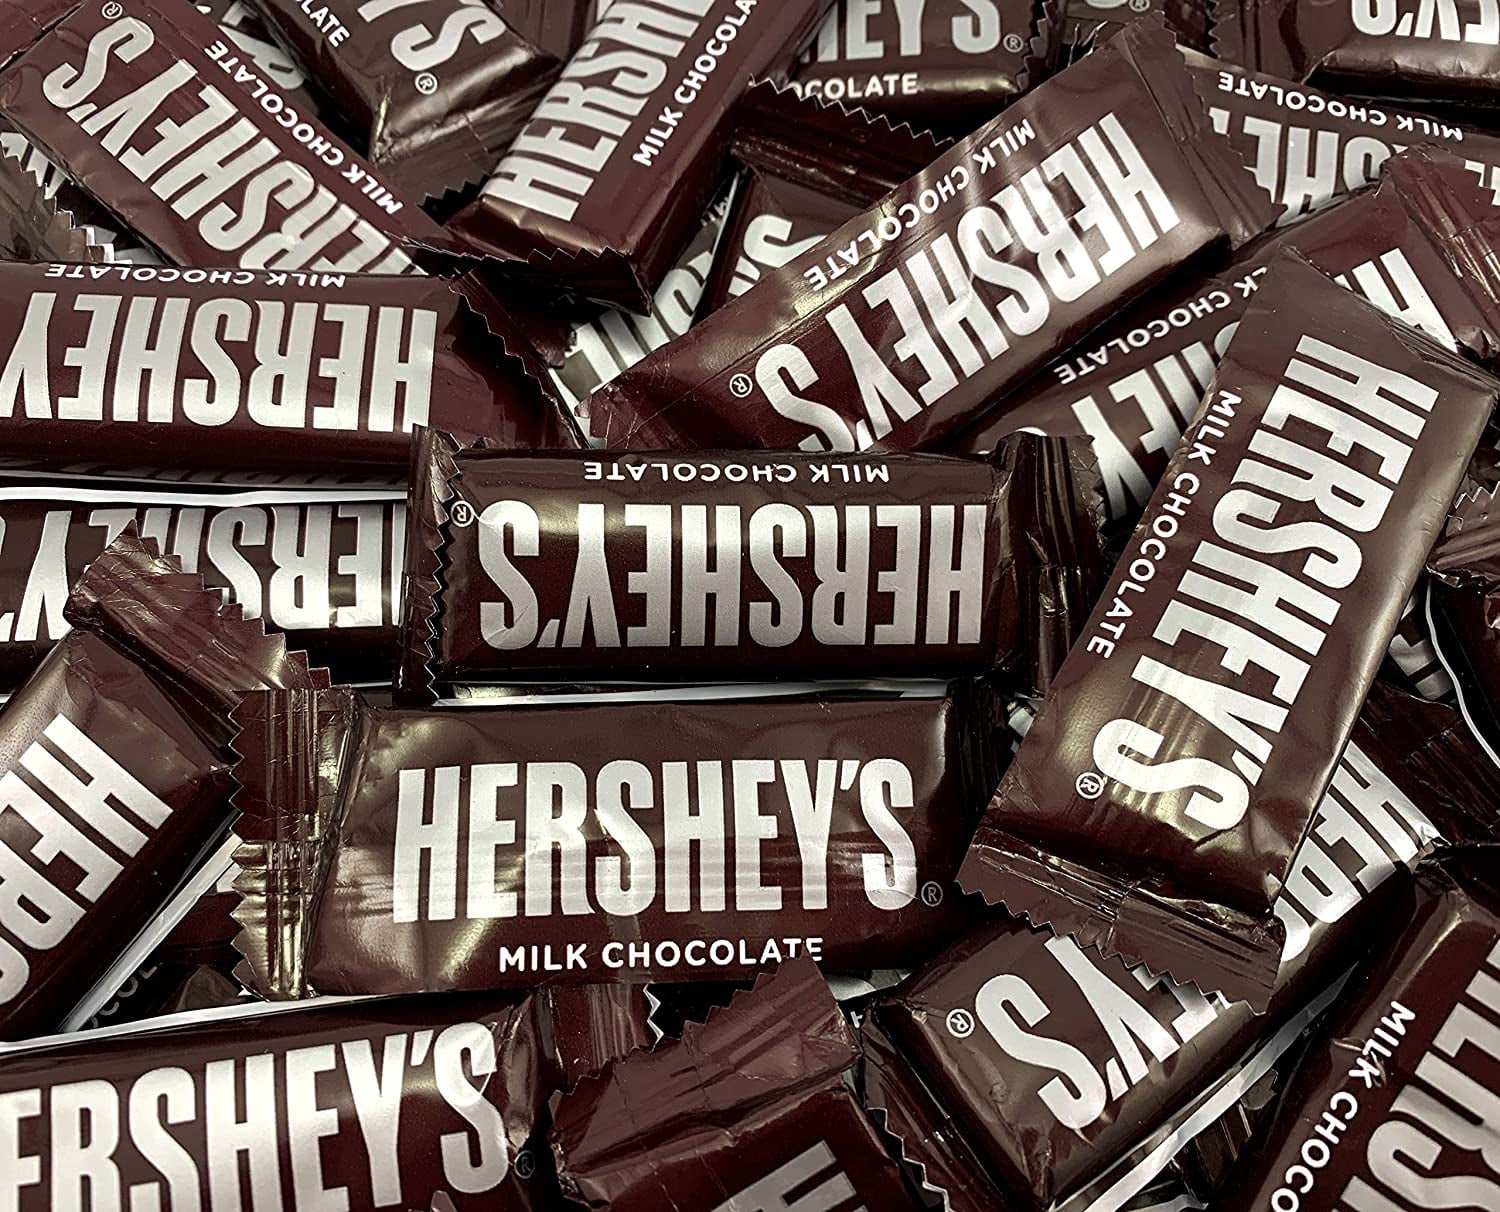 HERSHEY'S Milk Chocolate Snack Size Candy Bar 0.45 Ounces, 3 Pound Bag ...